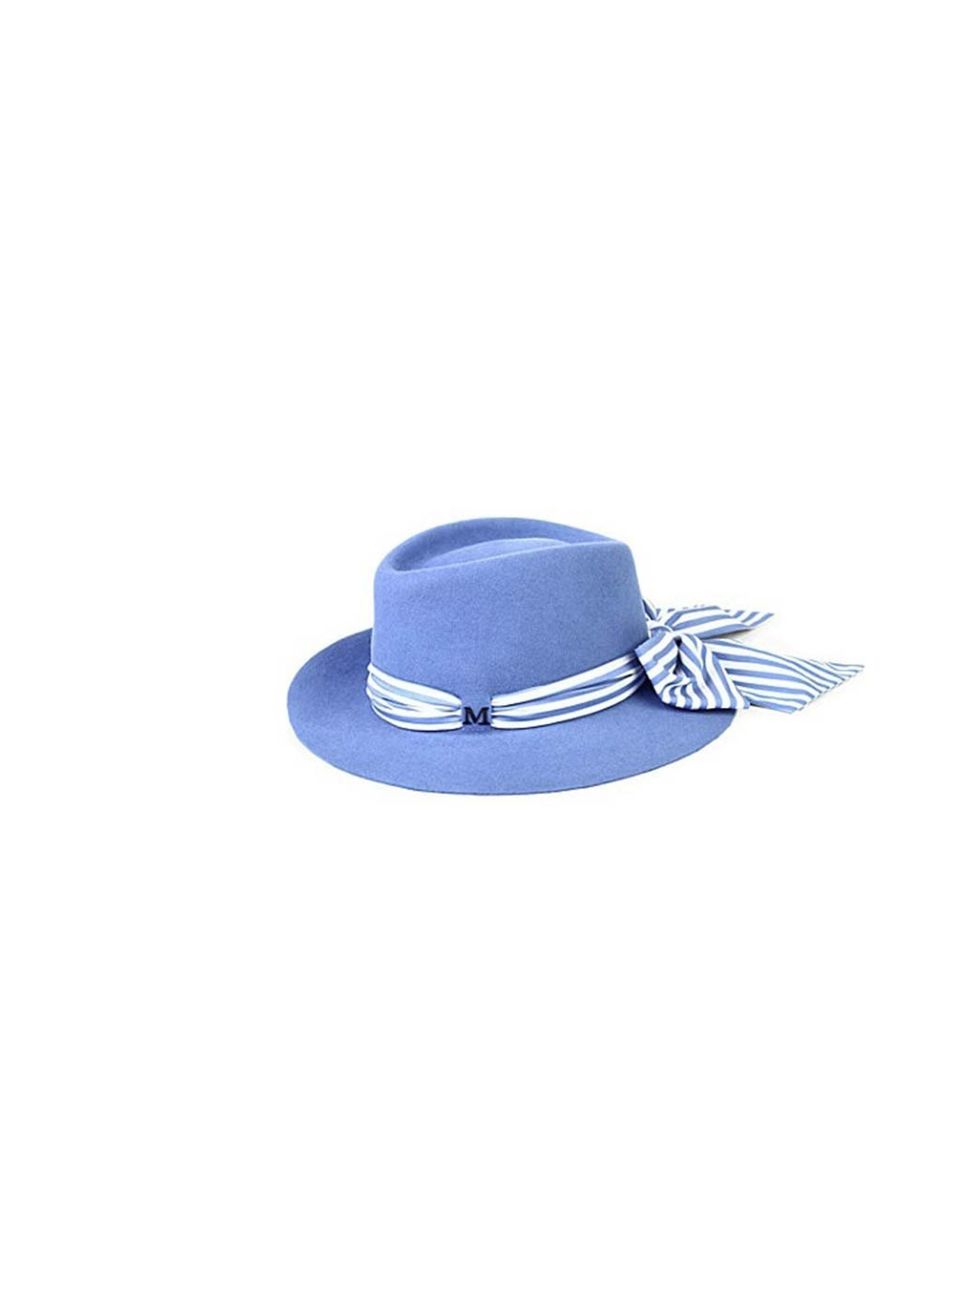 <p>Not ready for full blown pastels? Give the trend a try with this cornflower blue hat.</p><p>Maison Michel hat, £405 at <a href="http://www.selfridges.com/en/Womenswear/Categories/Shop-Accessories/Hats-gloves/Andre-striped-scarf-felt-hat_238-3003125-PS1